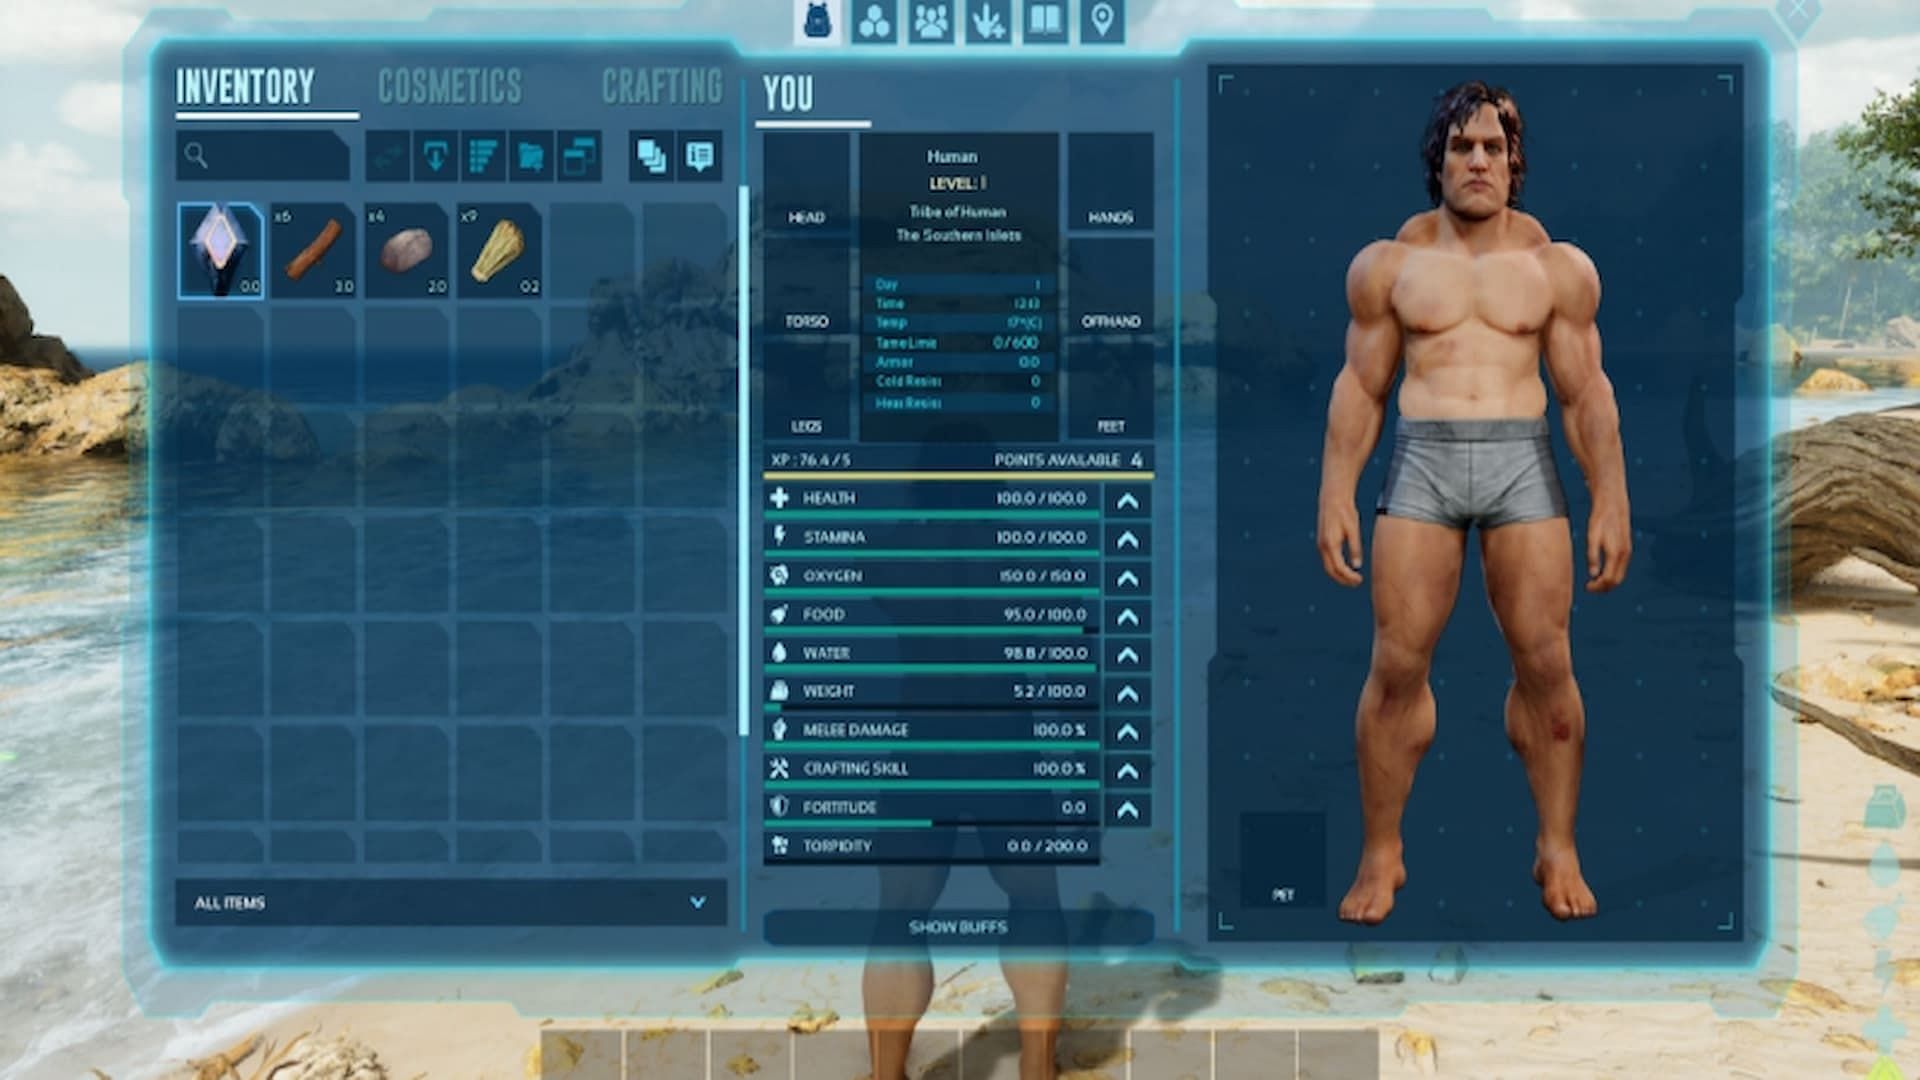 All players stats are shown beside the Inventory in the Character Menu (Image via Studio Wildcard)